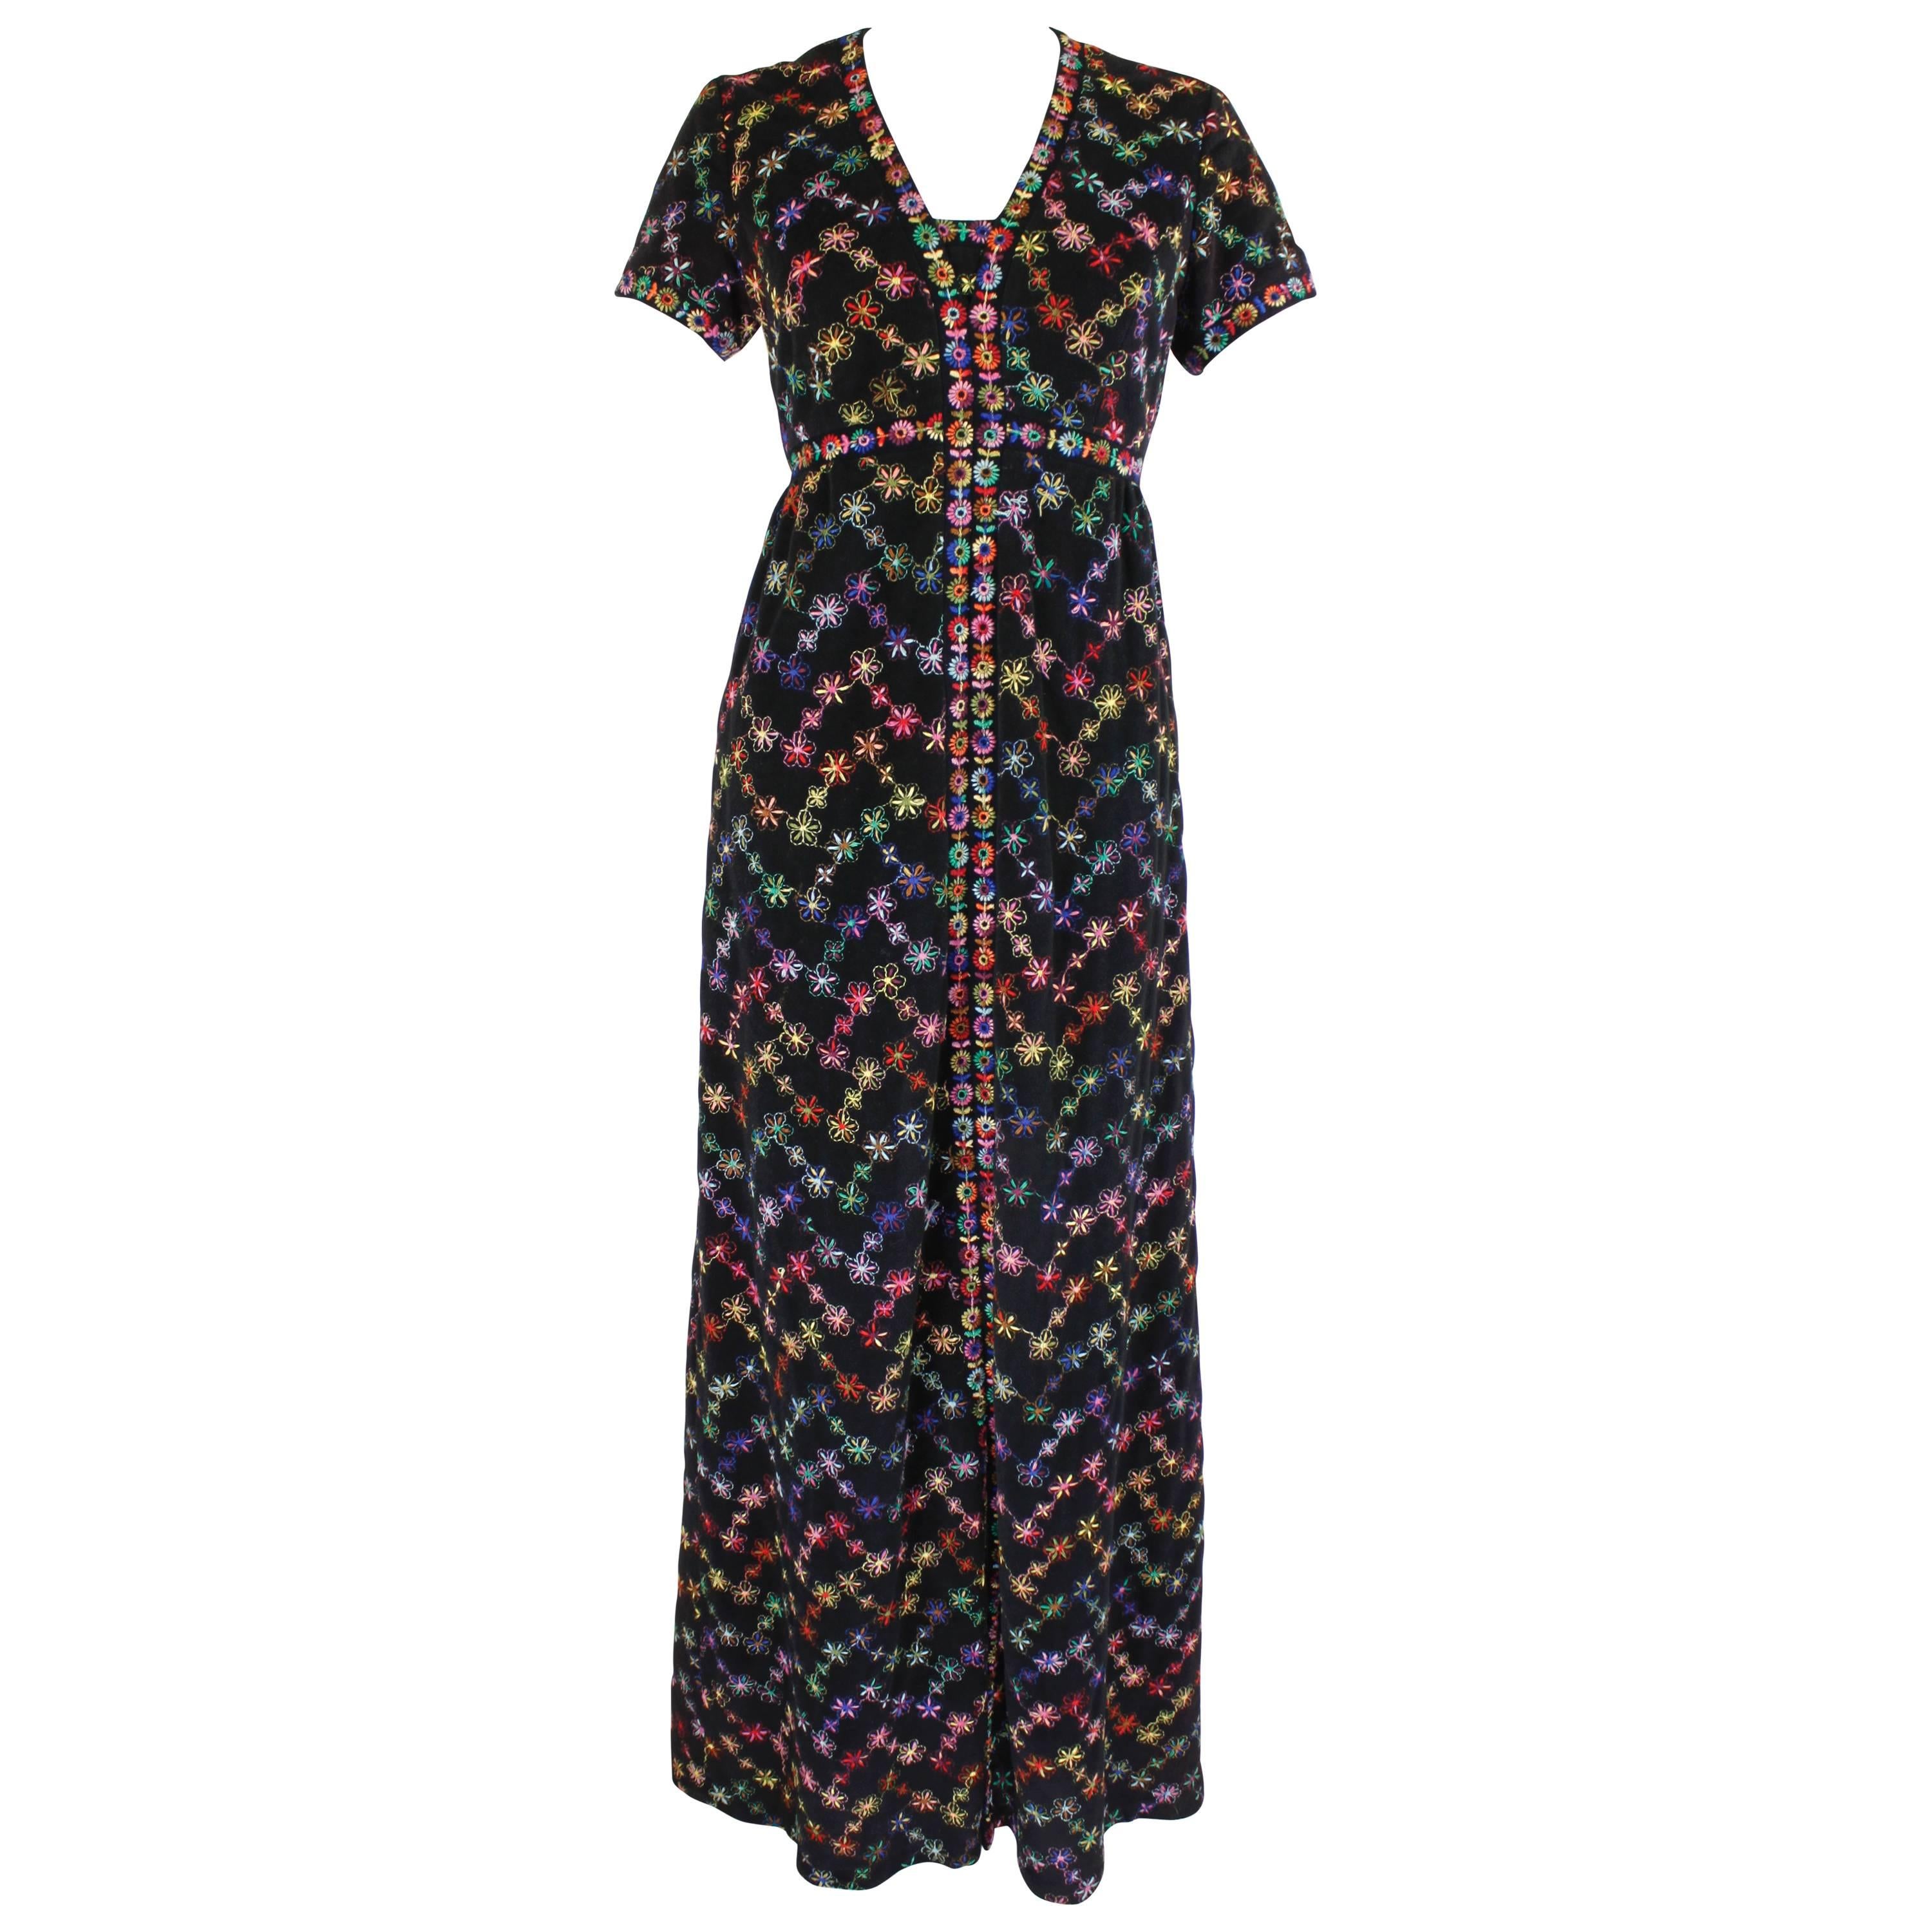 1970s Sant' Angelo Attribution Black Rainbow Embroidered Floral Maxi Dress